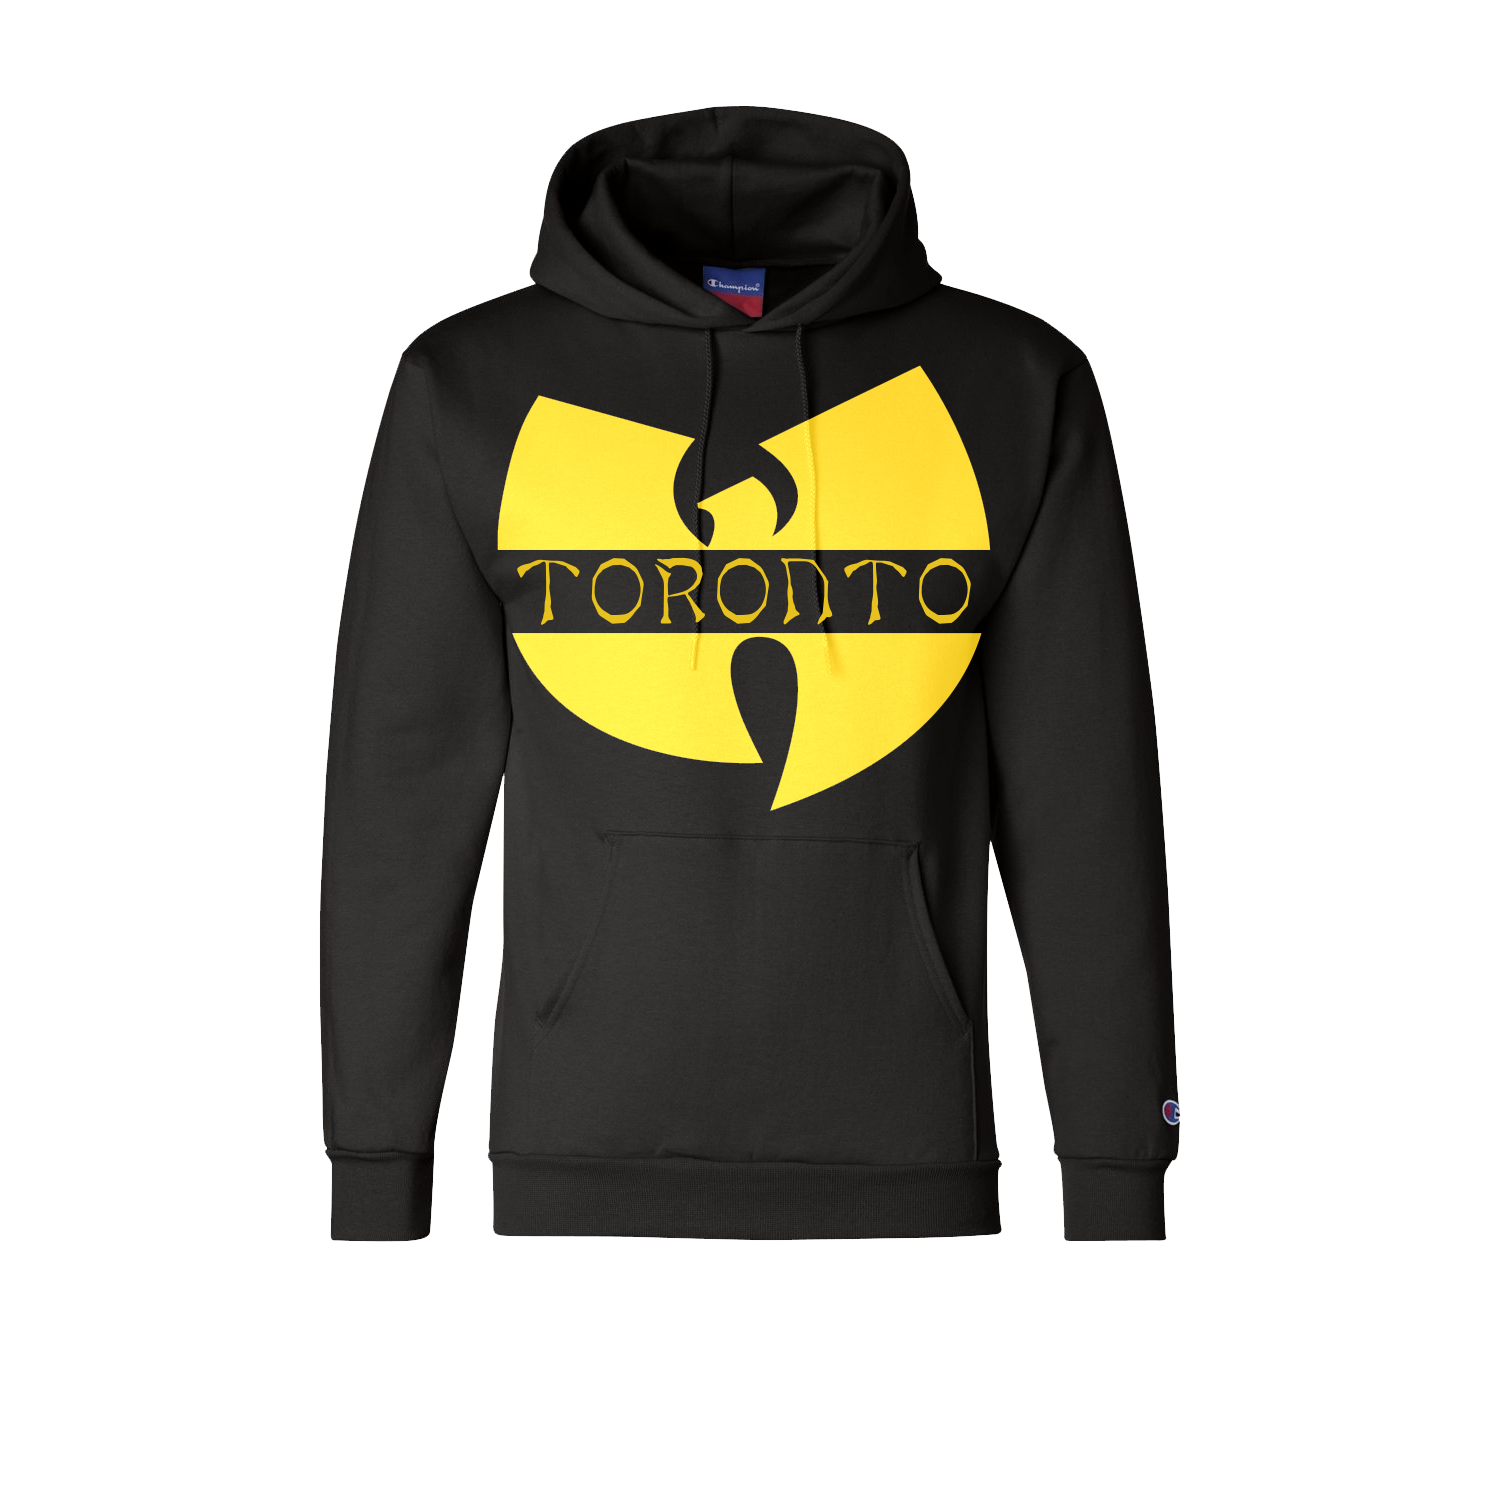 Toronto Tribute Champion Hoodie with Wu-Tang Inspired - Pullover Hoodie